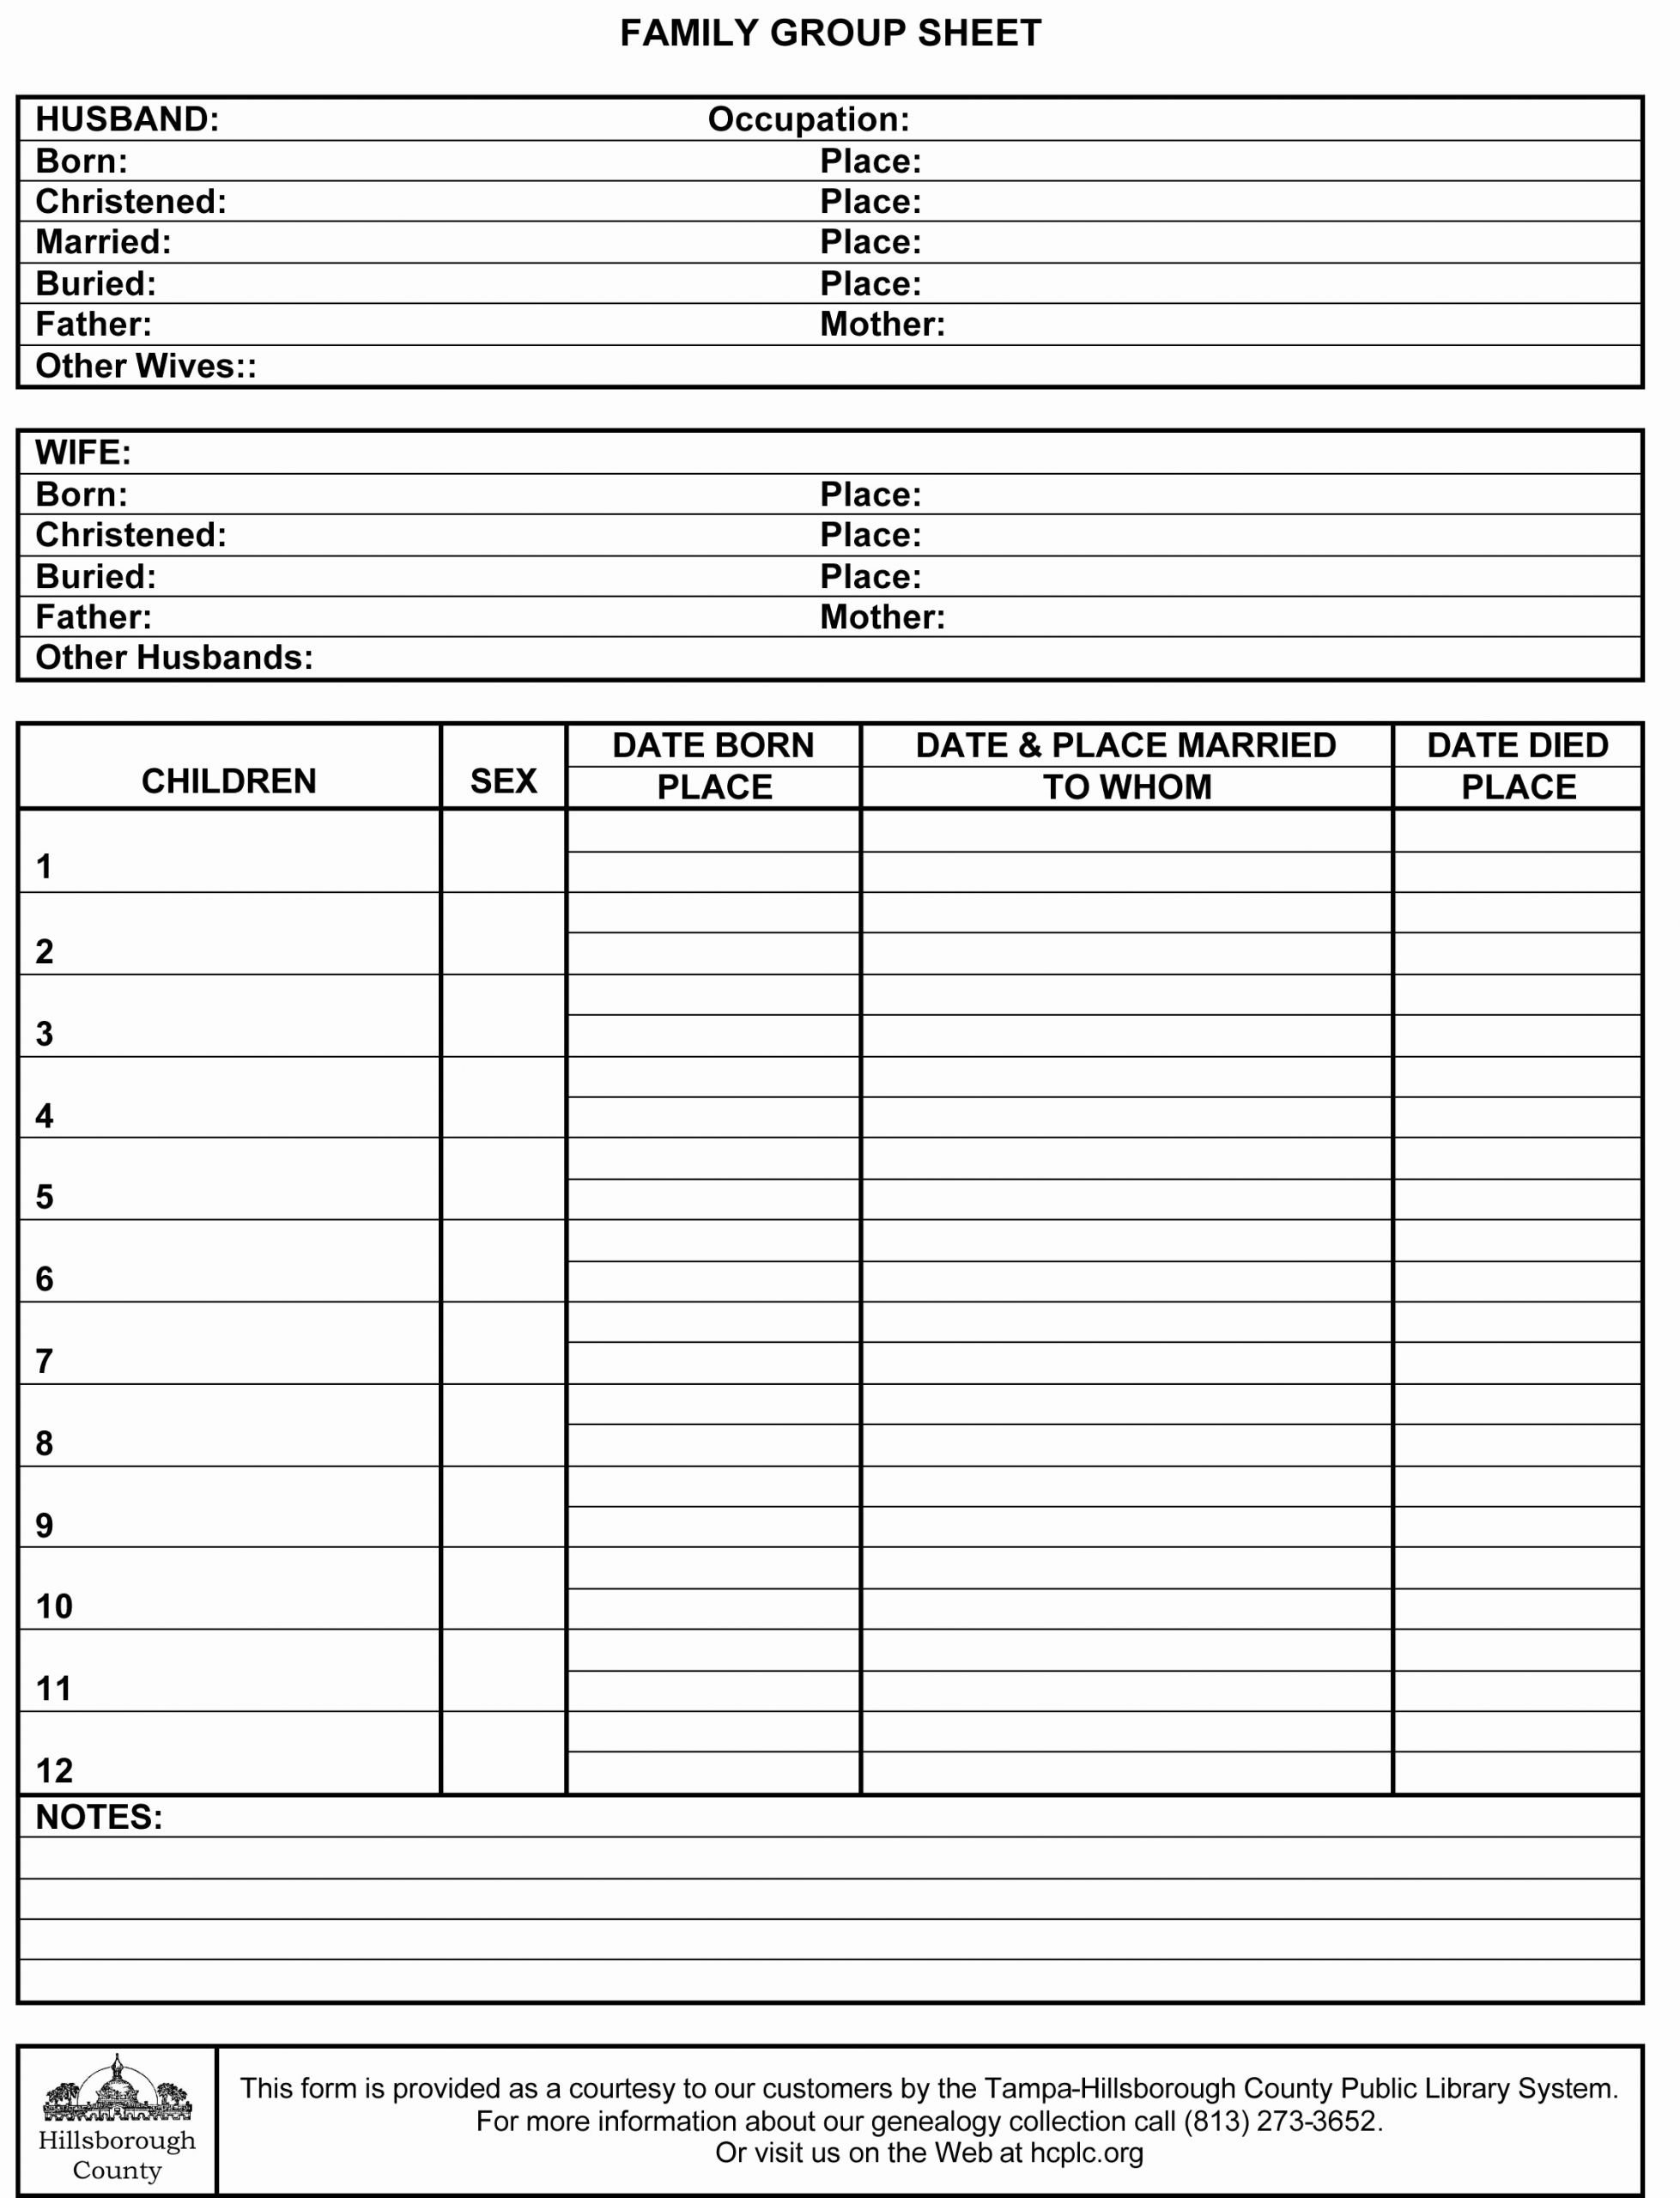 Family Group Sheet Template Luxury Family Group Sheet Pile Information About An Ancestor